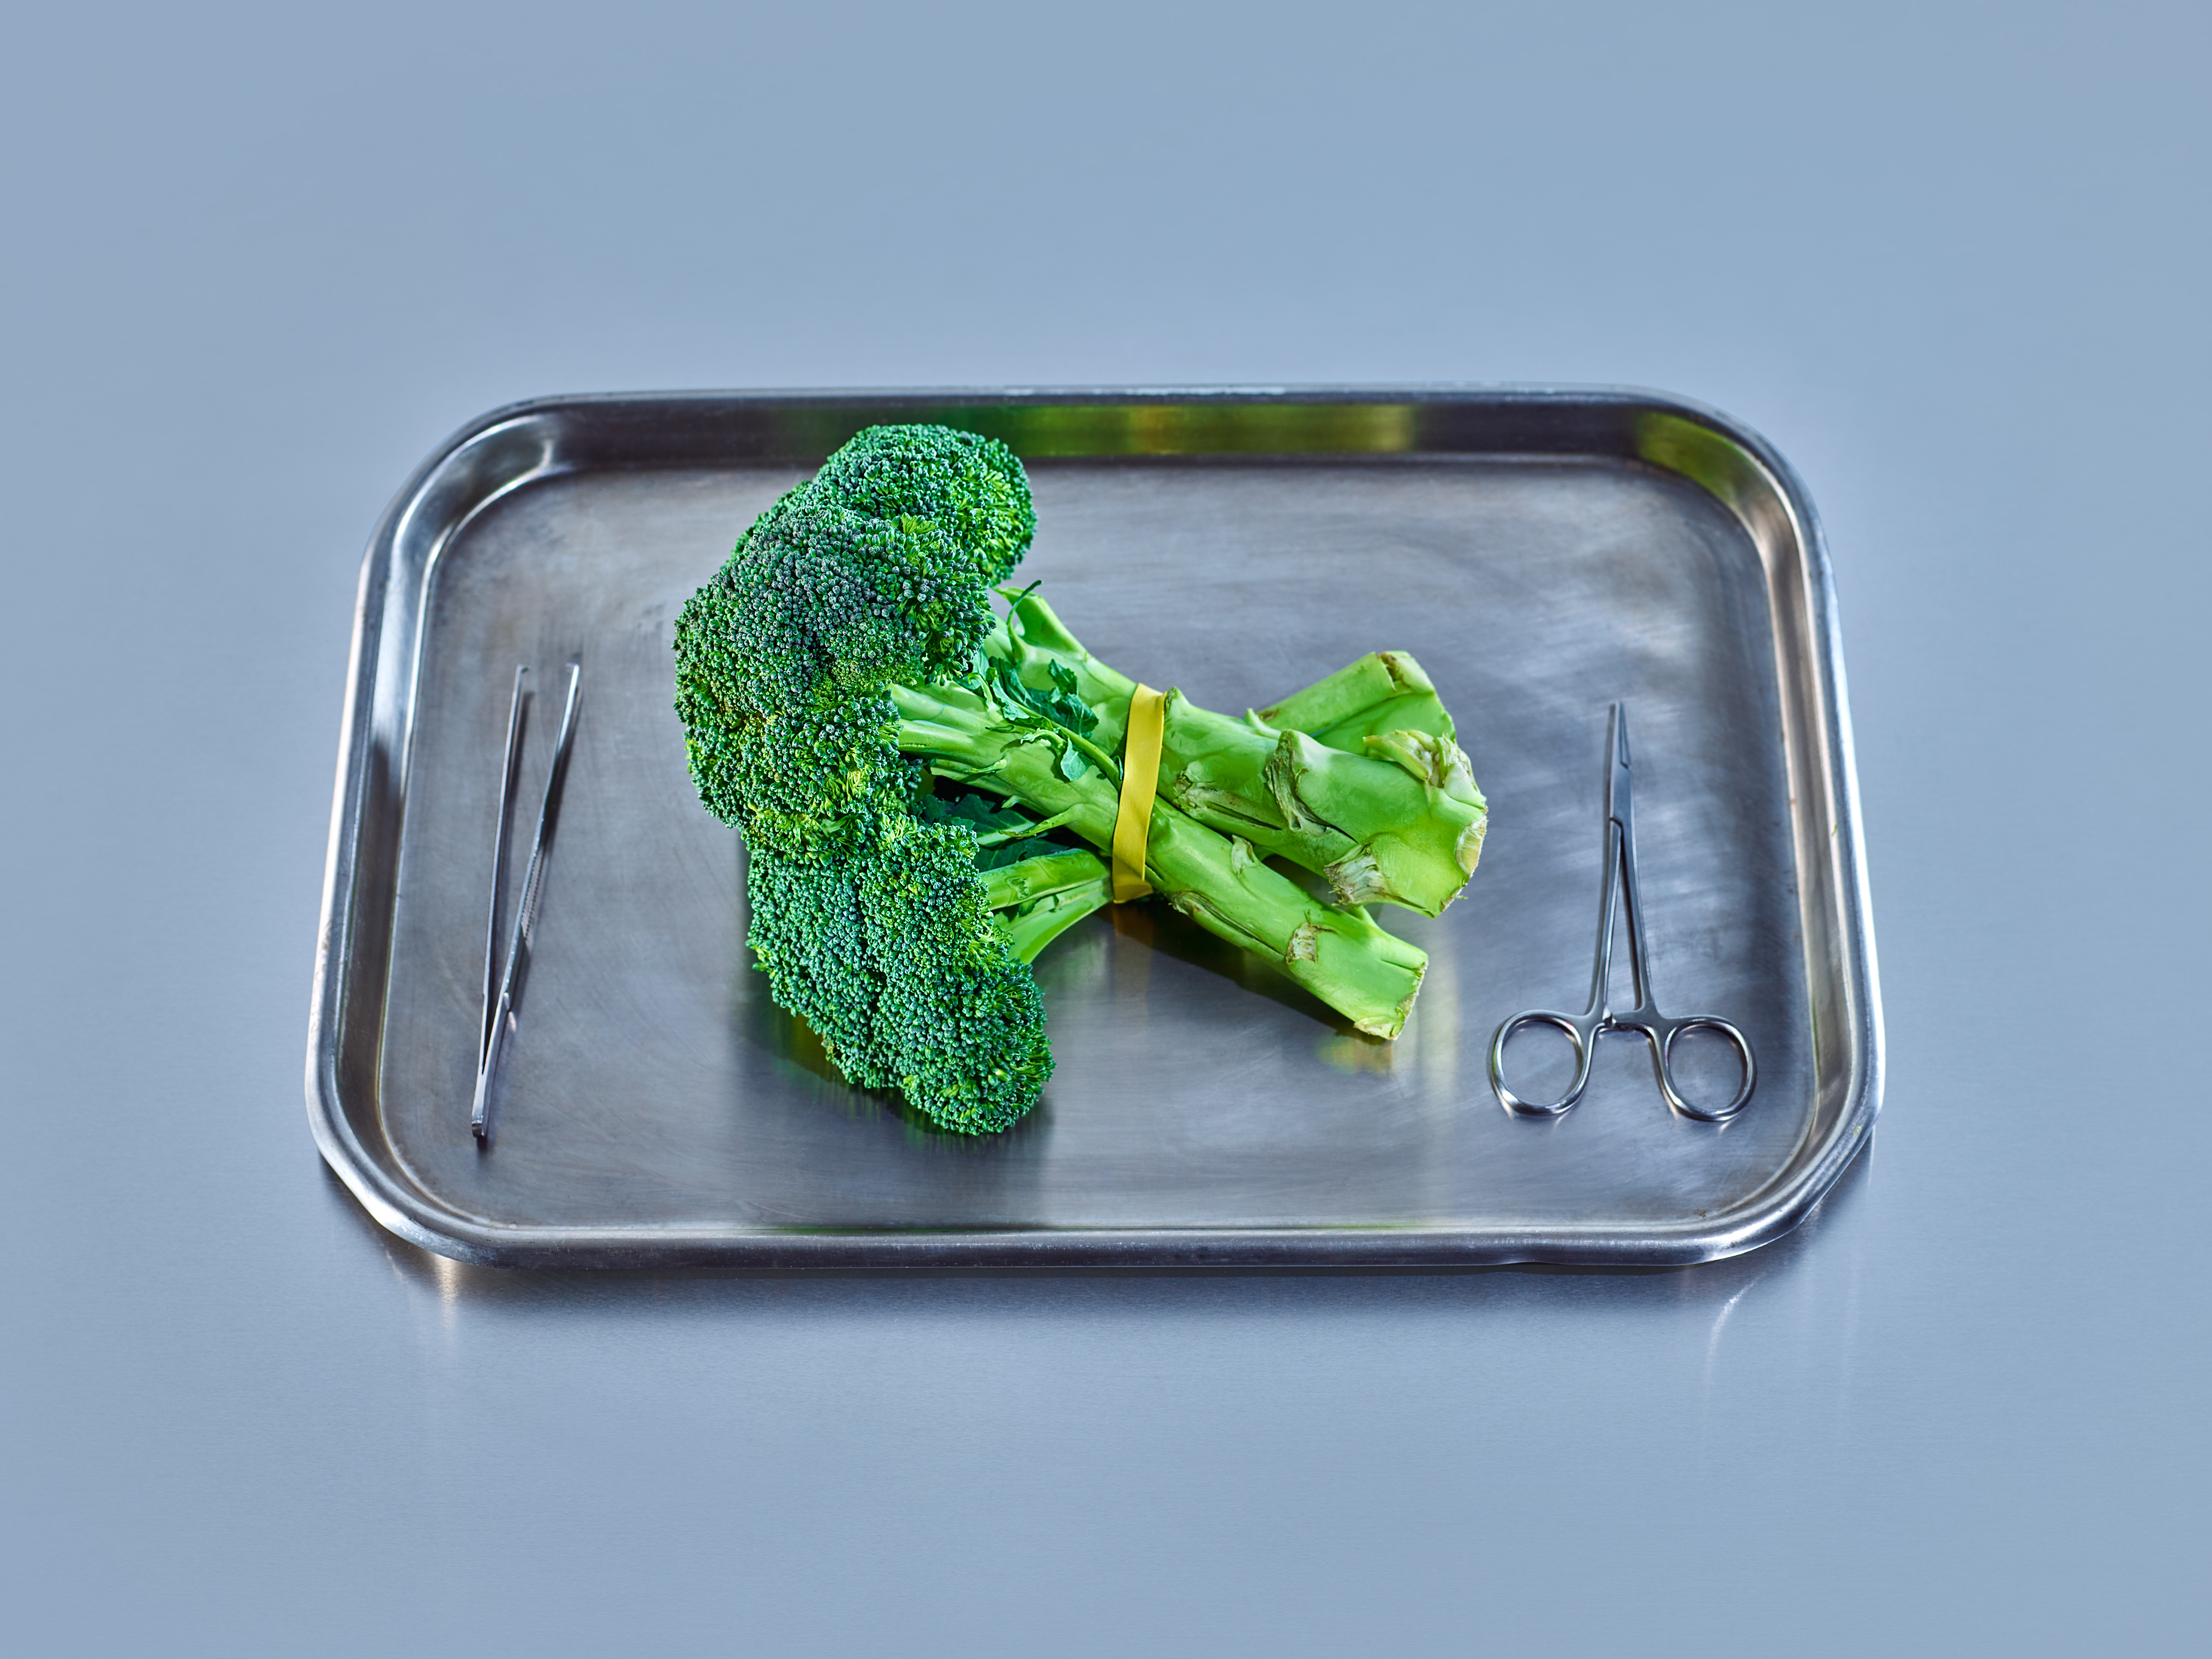 BROCCOLI | Loaded with glucosino­lates. Glucosinolates convert to compounds that can slow breast cancer cells from growing in the lab (Zachary Zavislak for TIME)